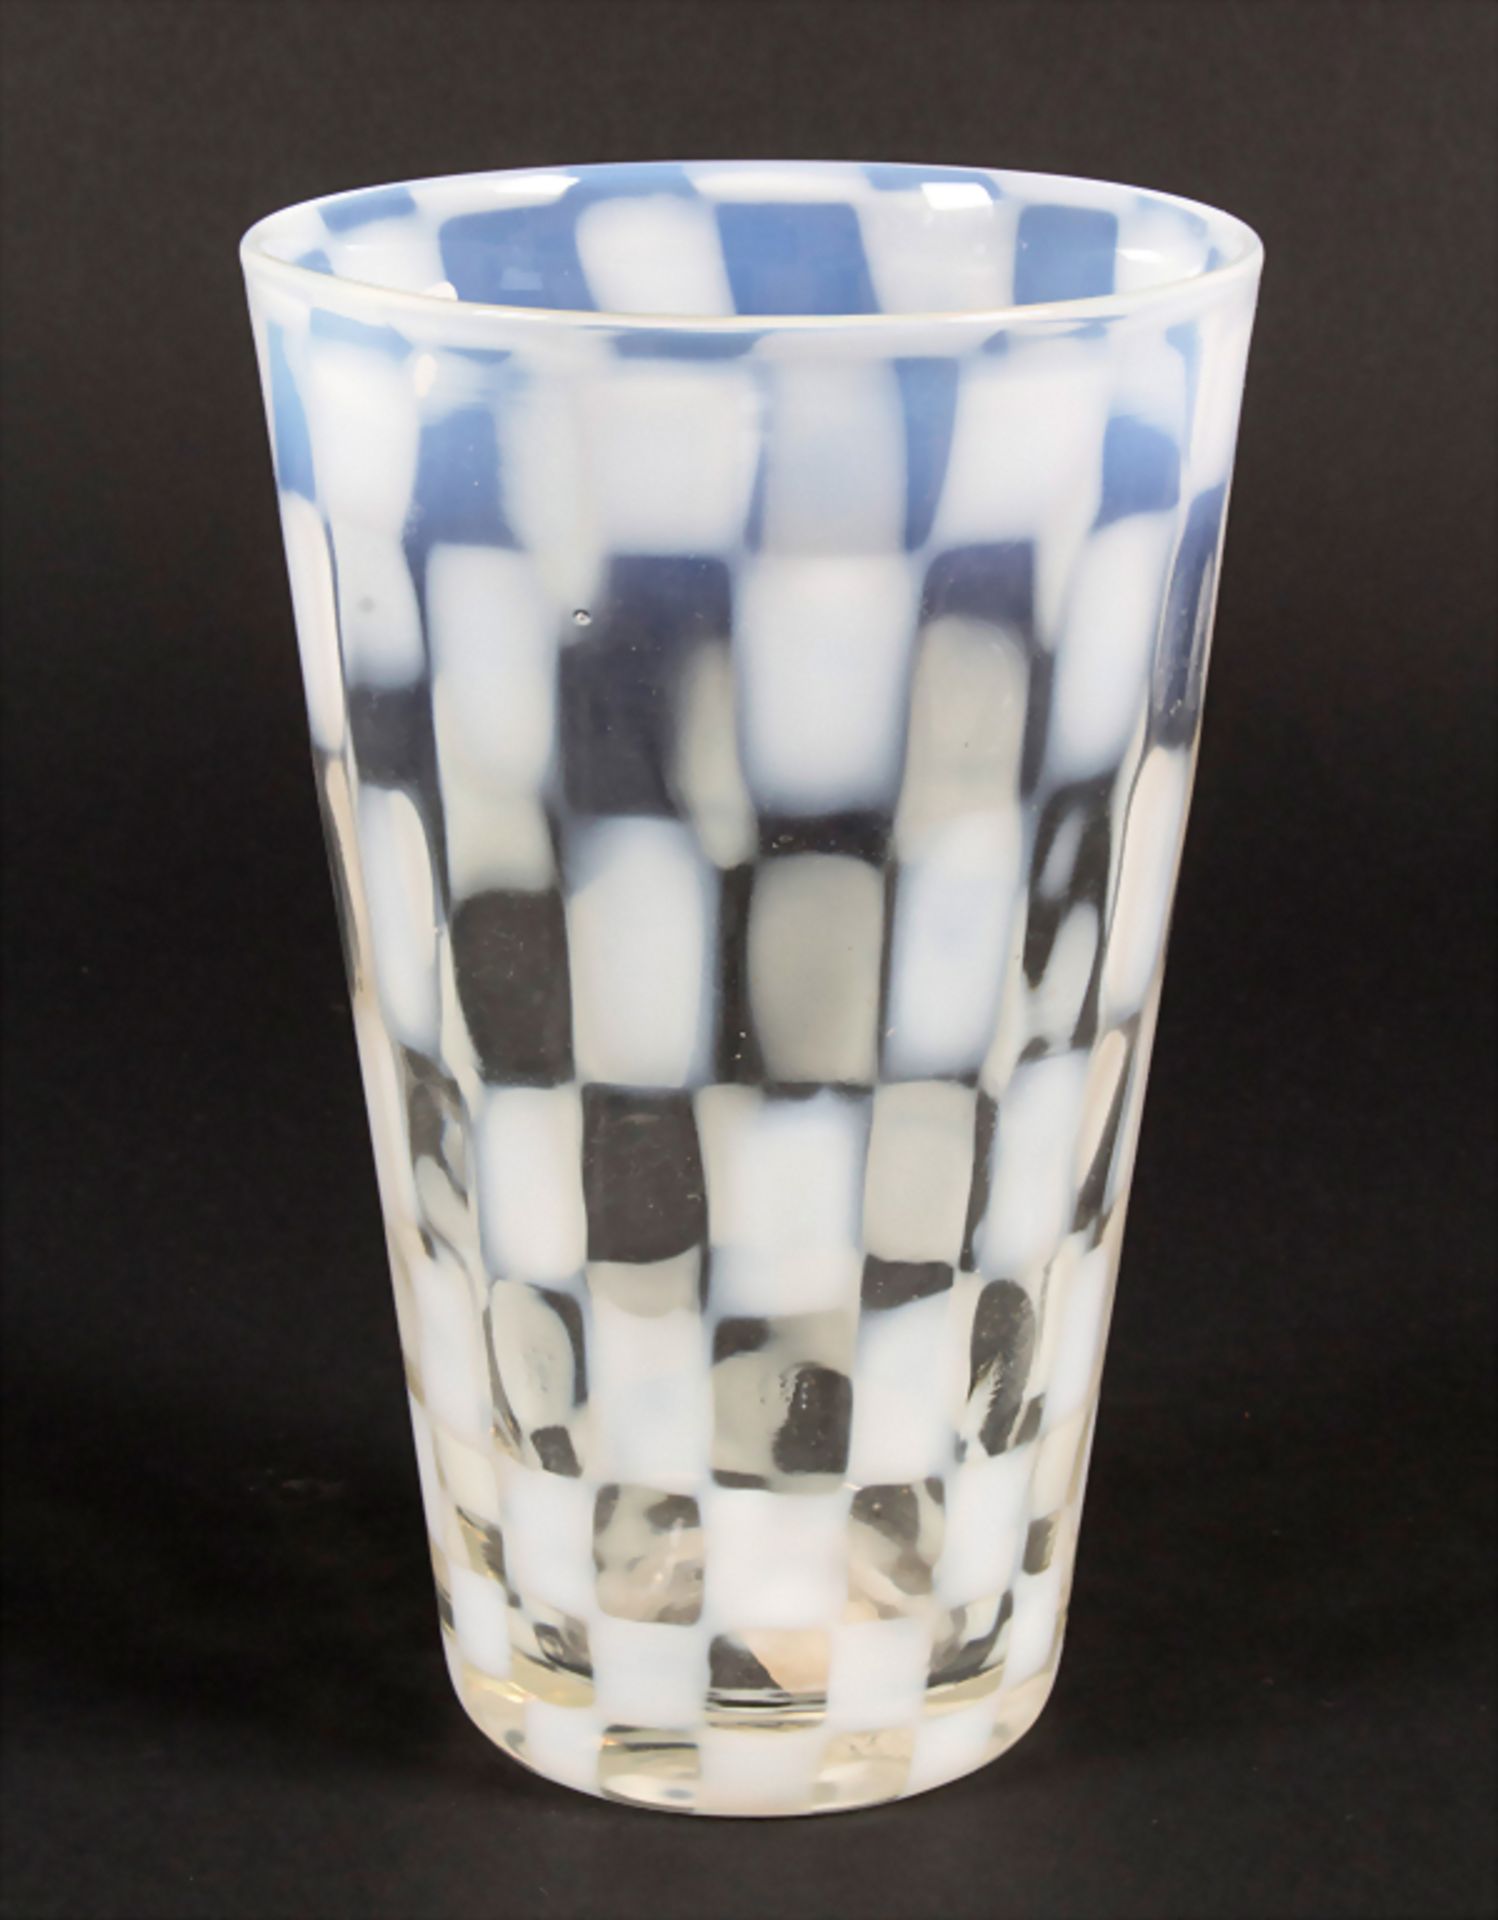 Glasziervase / A decorative glass vase, wohl Brovier & Toso, MuranoMaterial: rauchfarb - Image 2 of 4